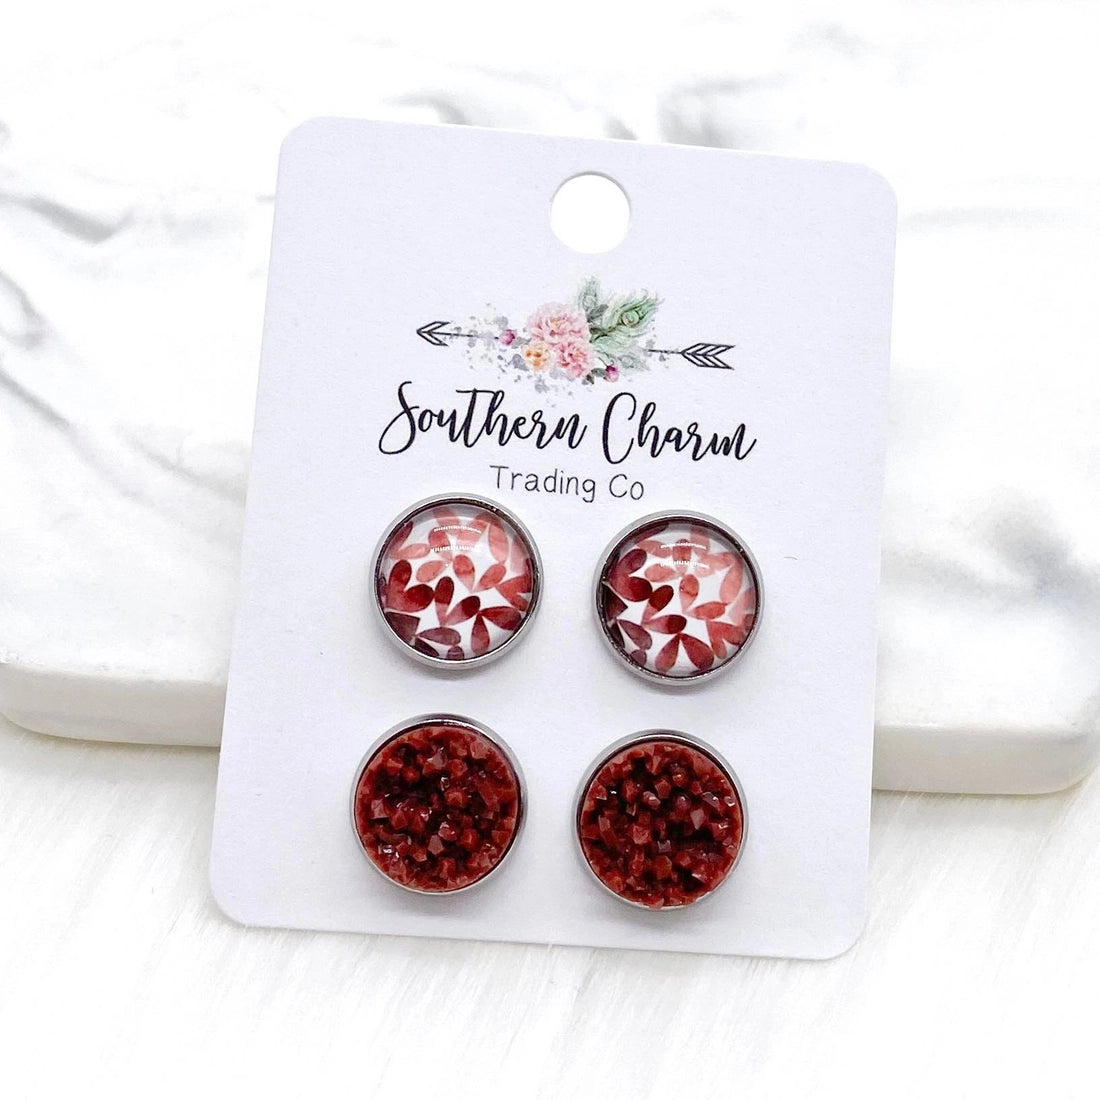 12mm Southern Charm Autumn Leaves & Black Cherry Crystals in Stainless